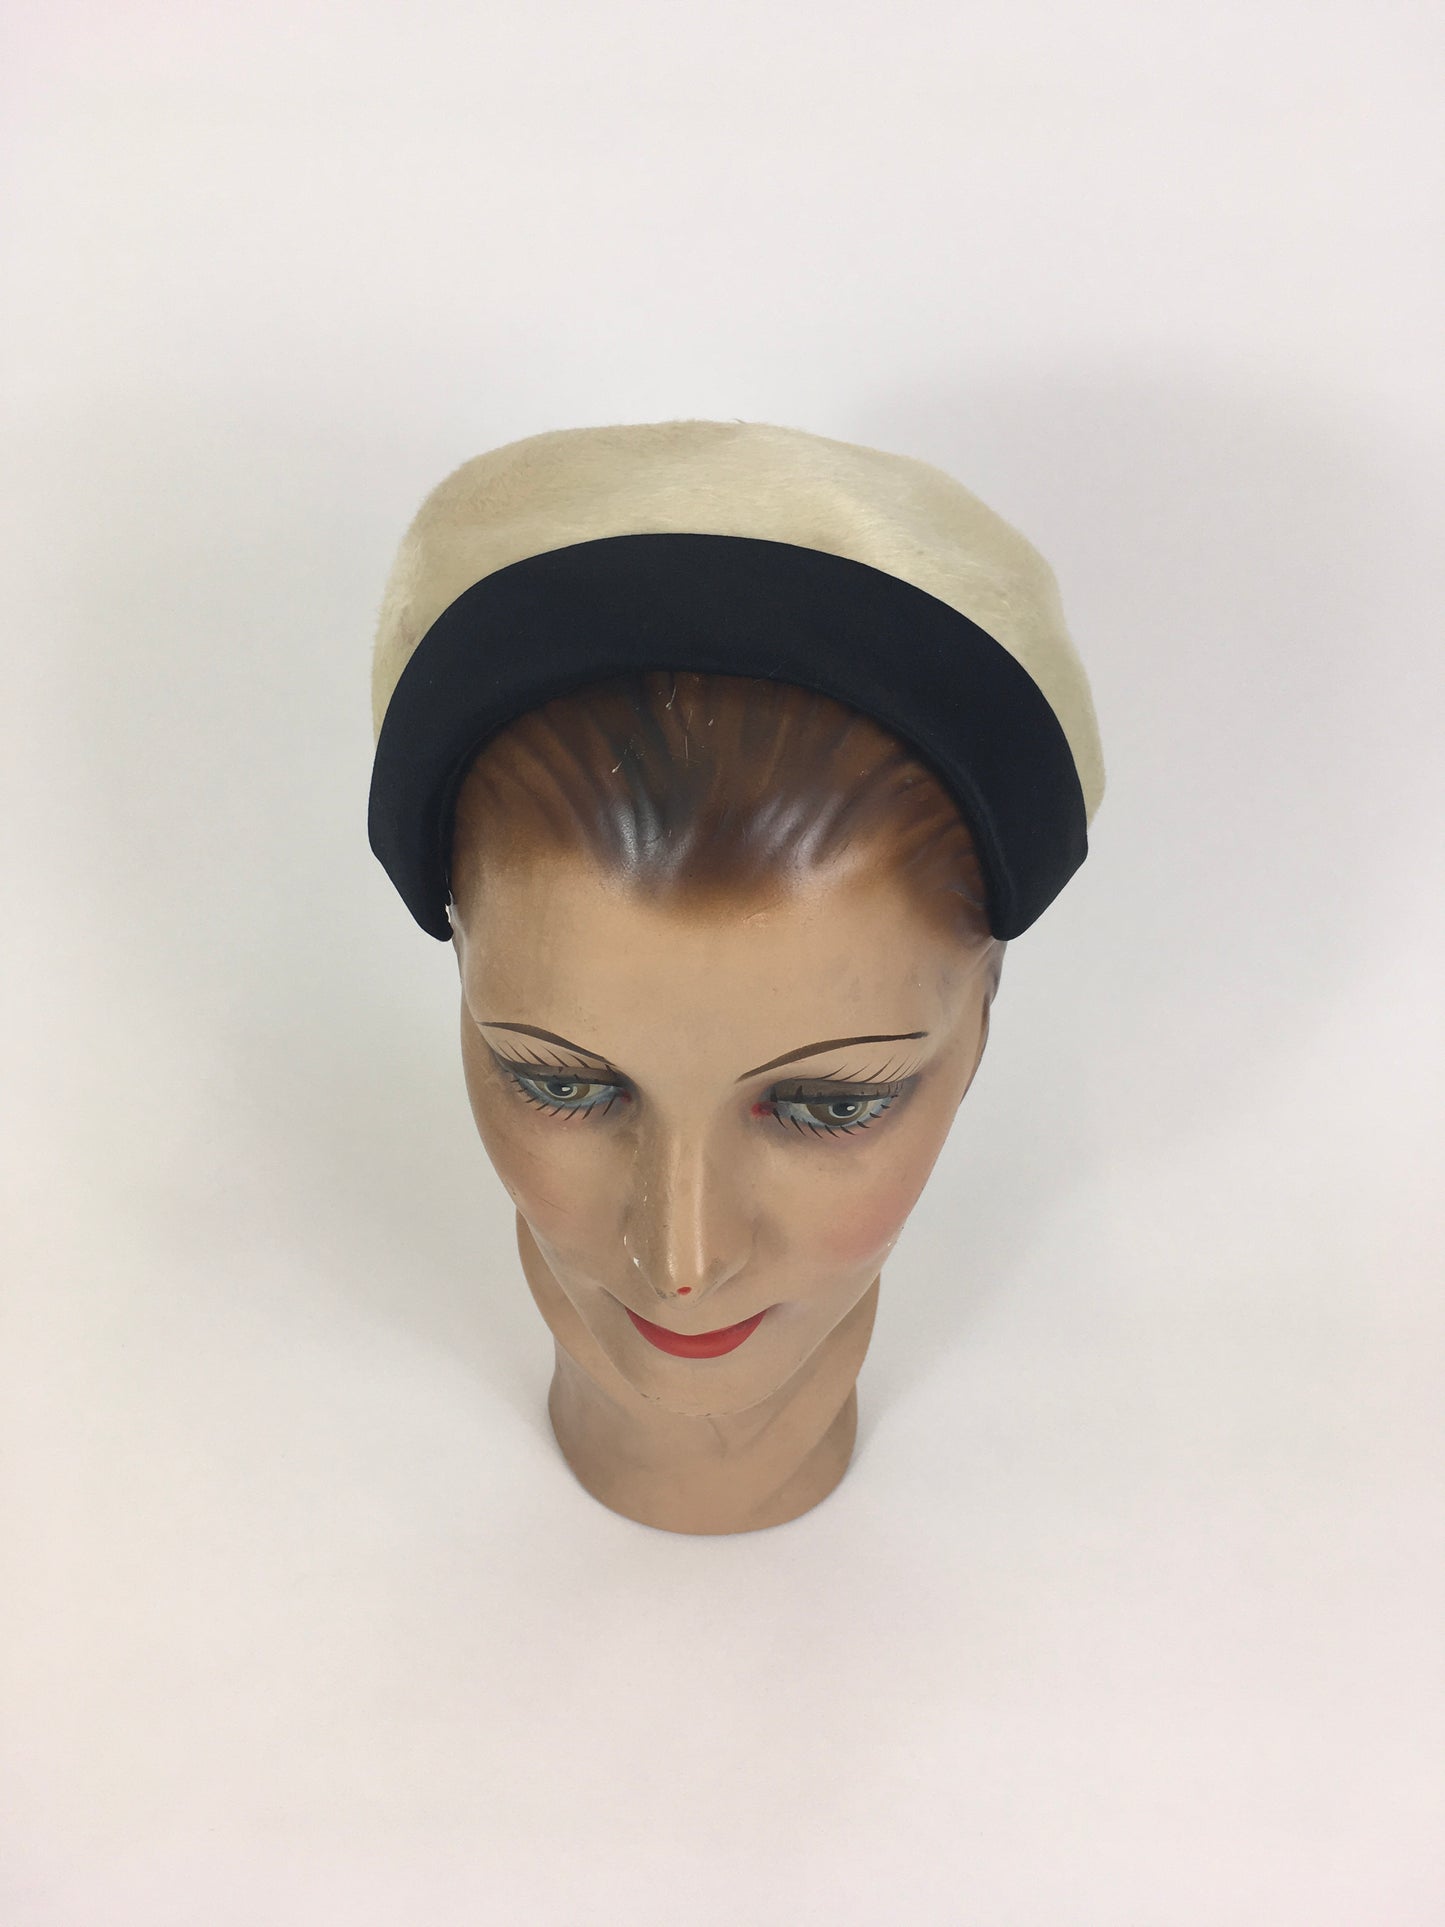 Original 1950’s Darling Headpiece in Cream with Black Banding - ‘ Emme in New York ‘ Label